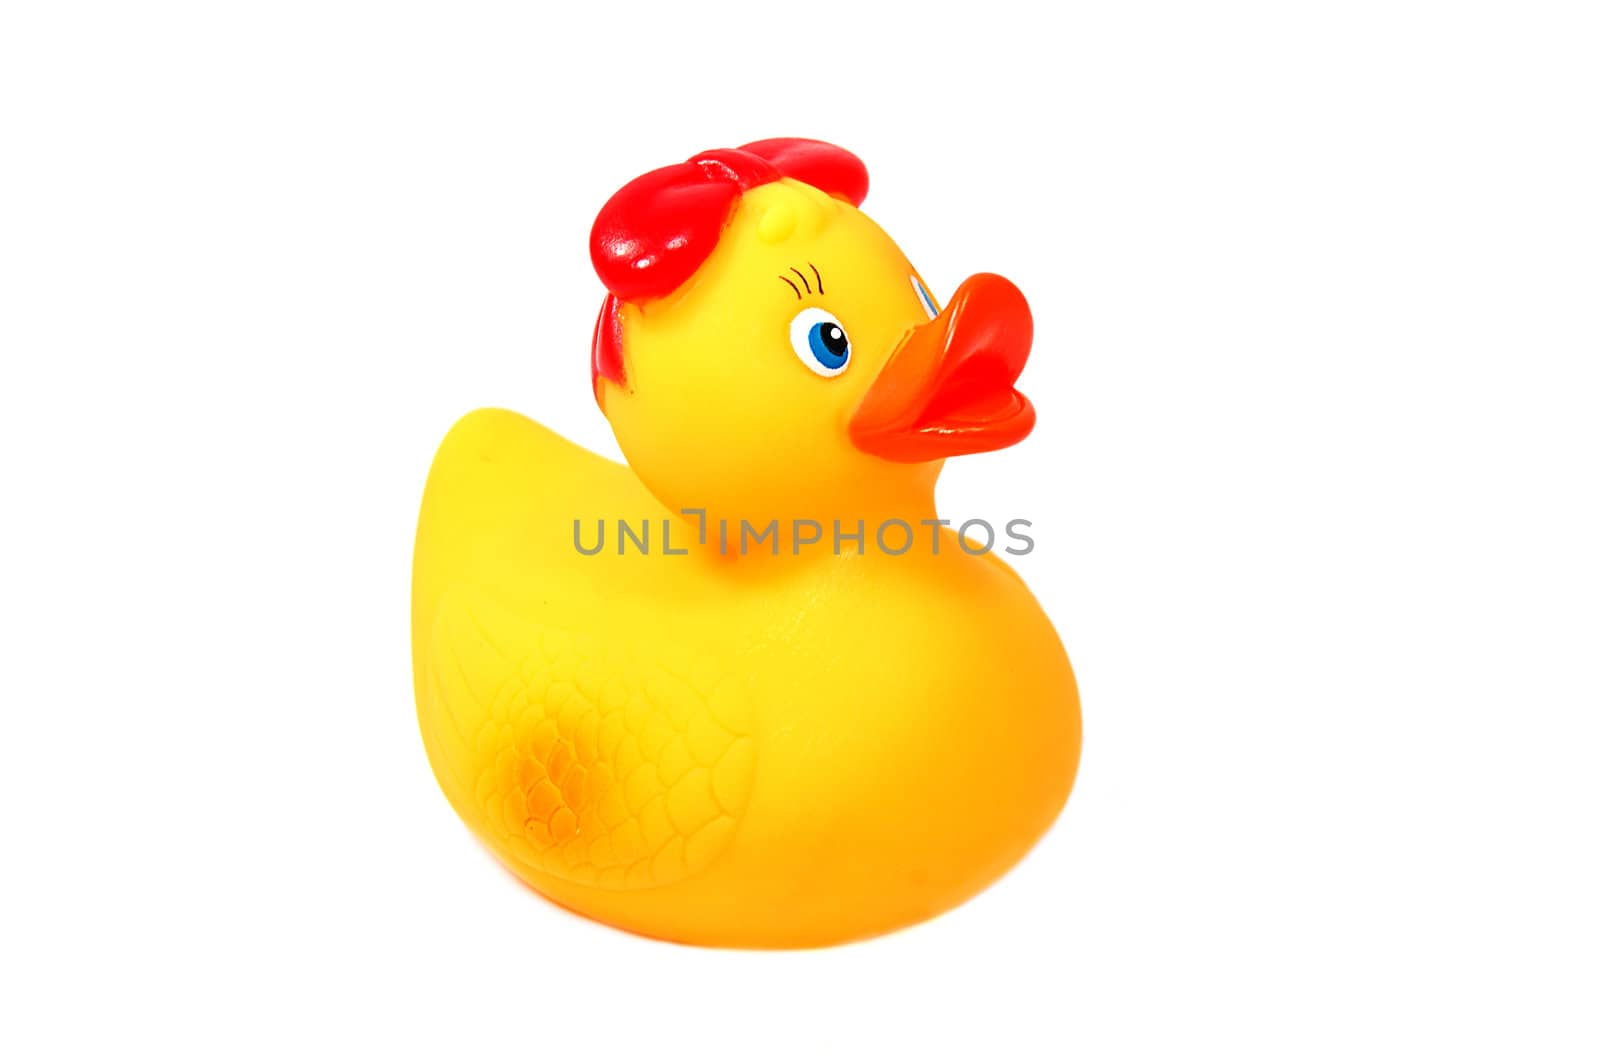 Rubber duck by Angel_a